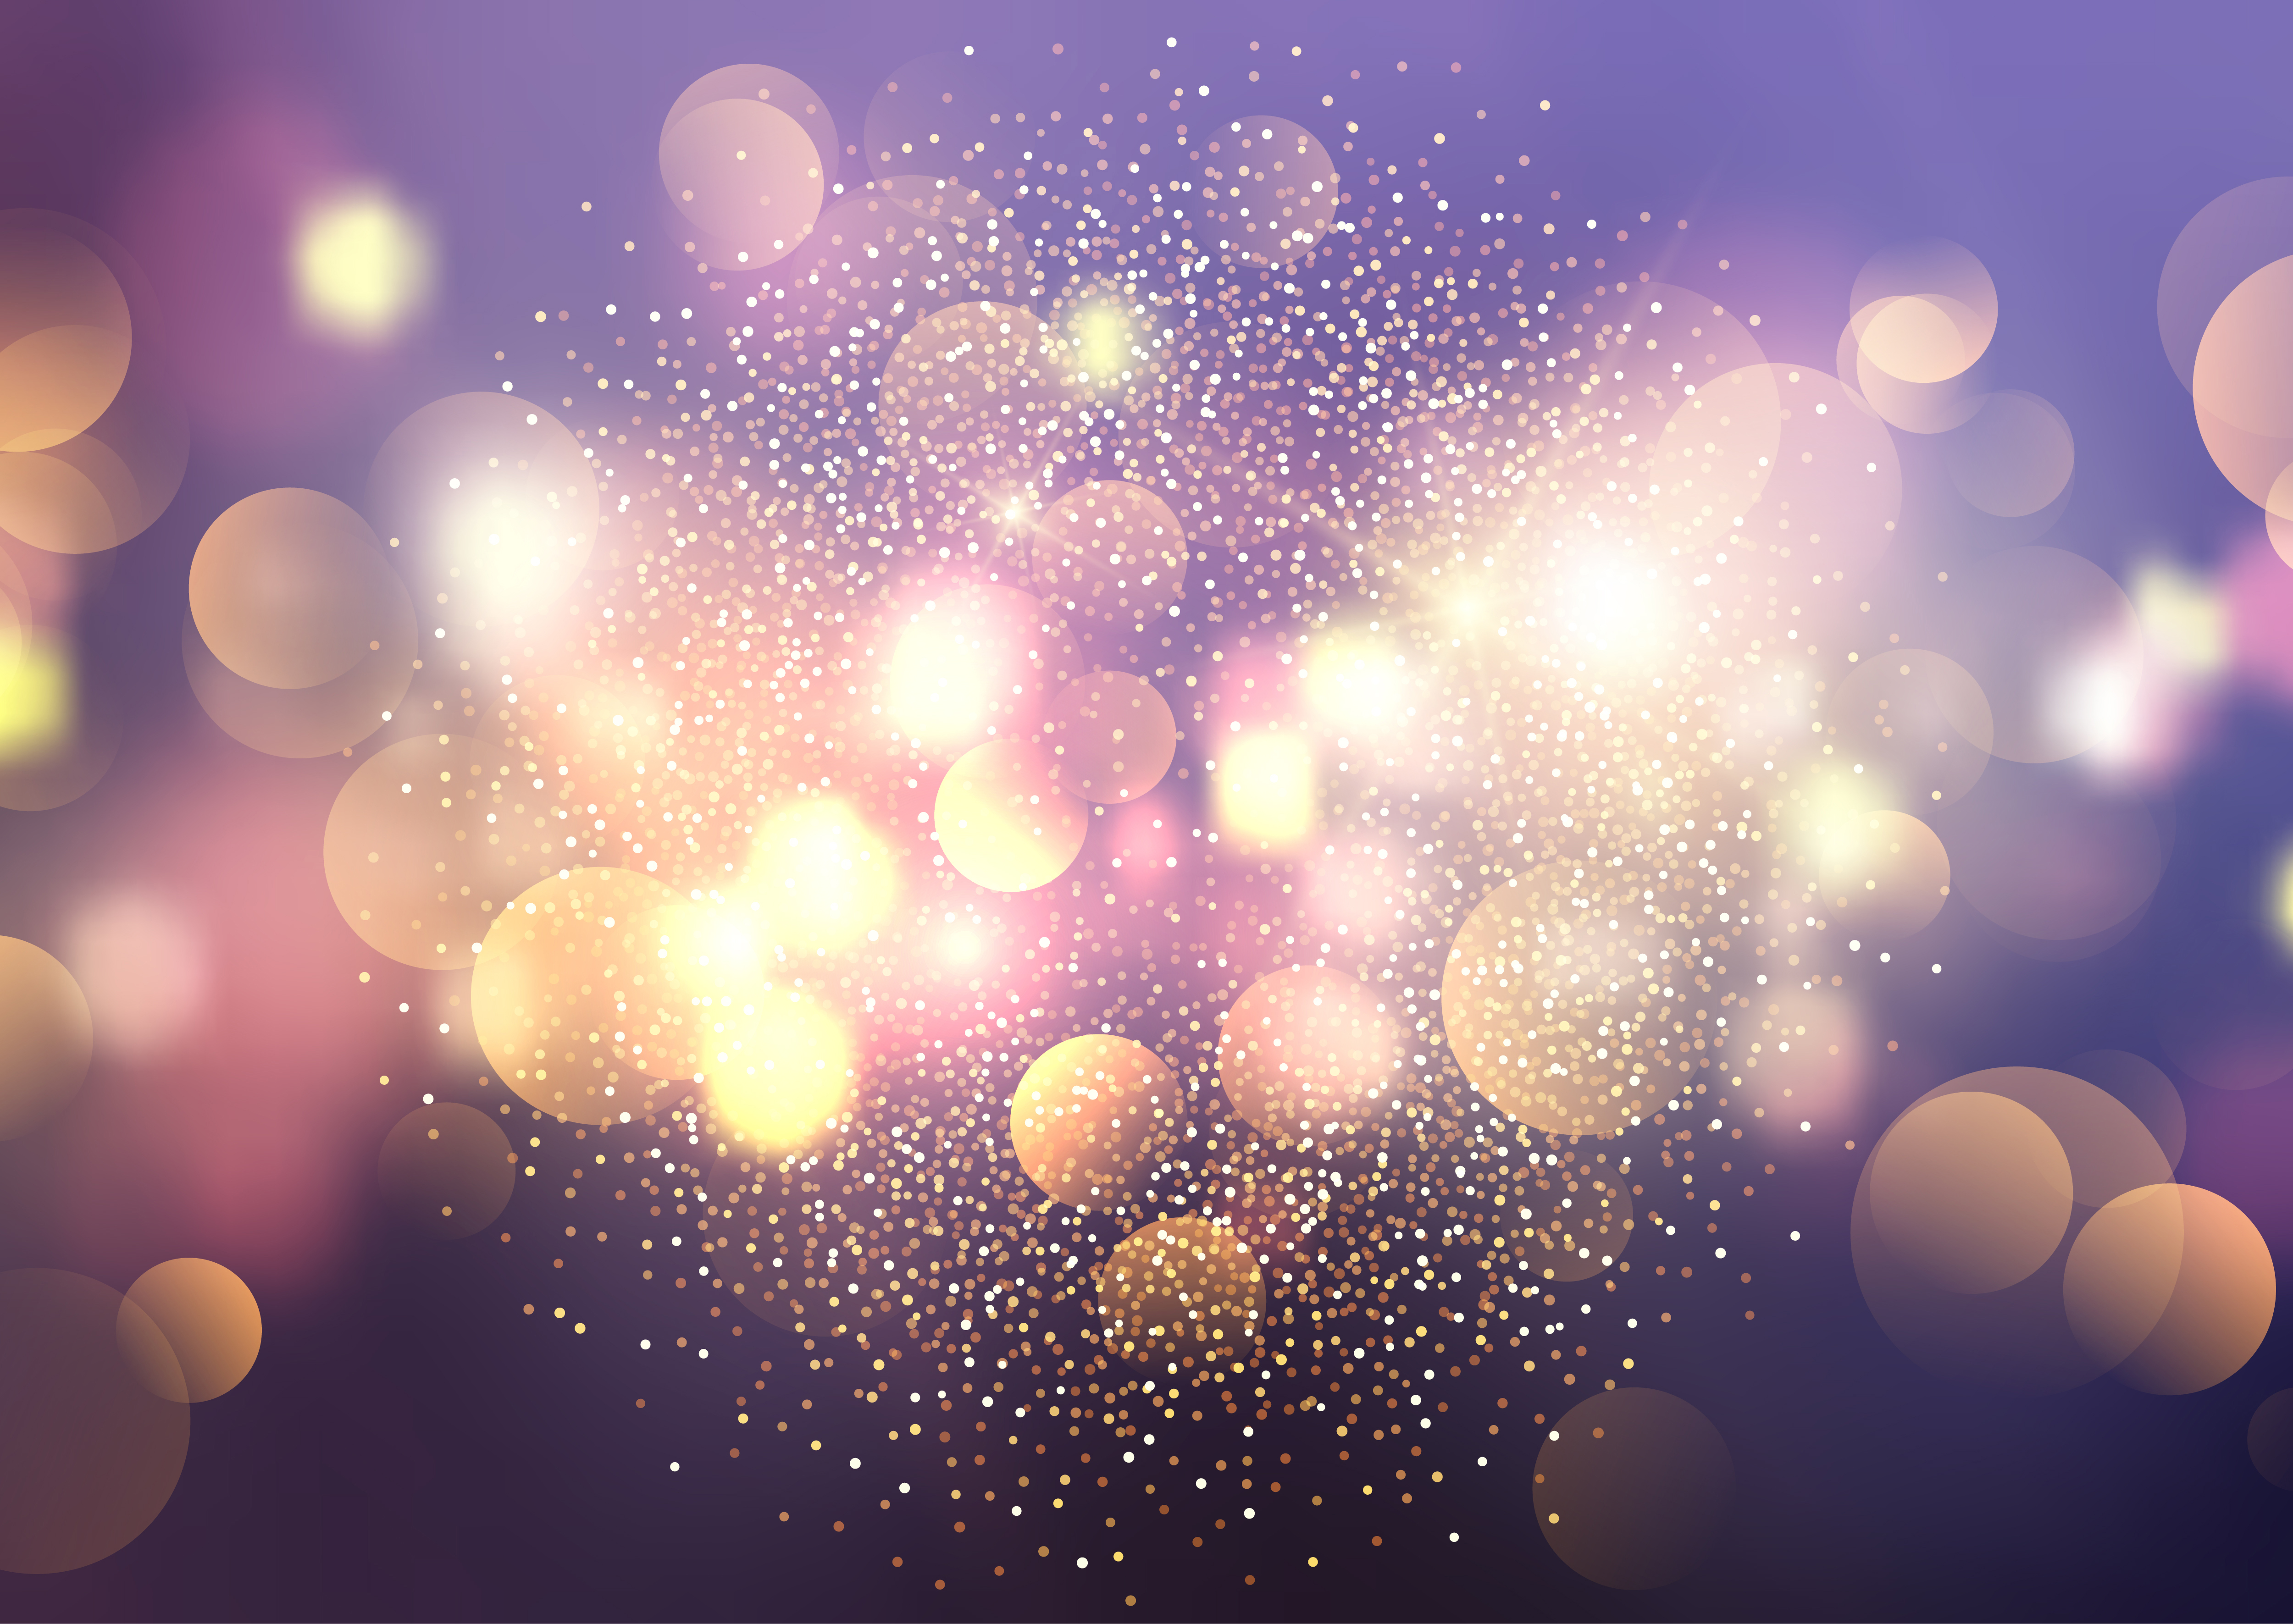 Bokeh lights and glitter background - Download Free ...